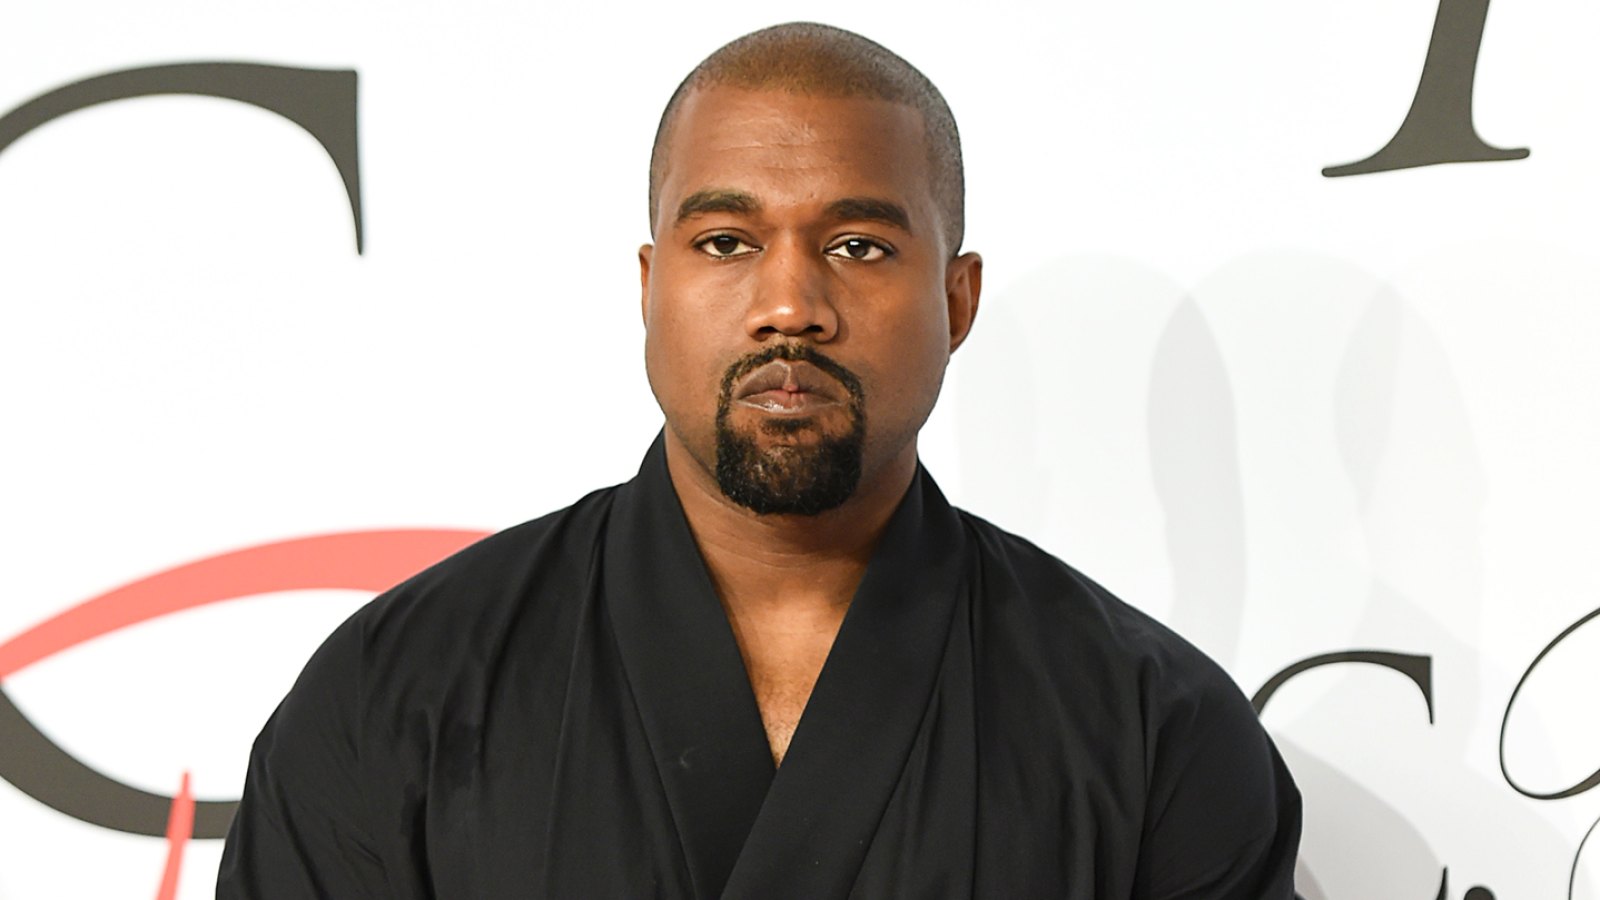 'Vogue' Magazine Has No Intention of Working With Kanye West Again After Controversies